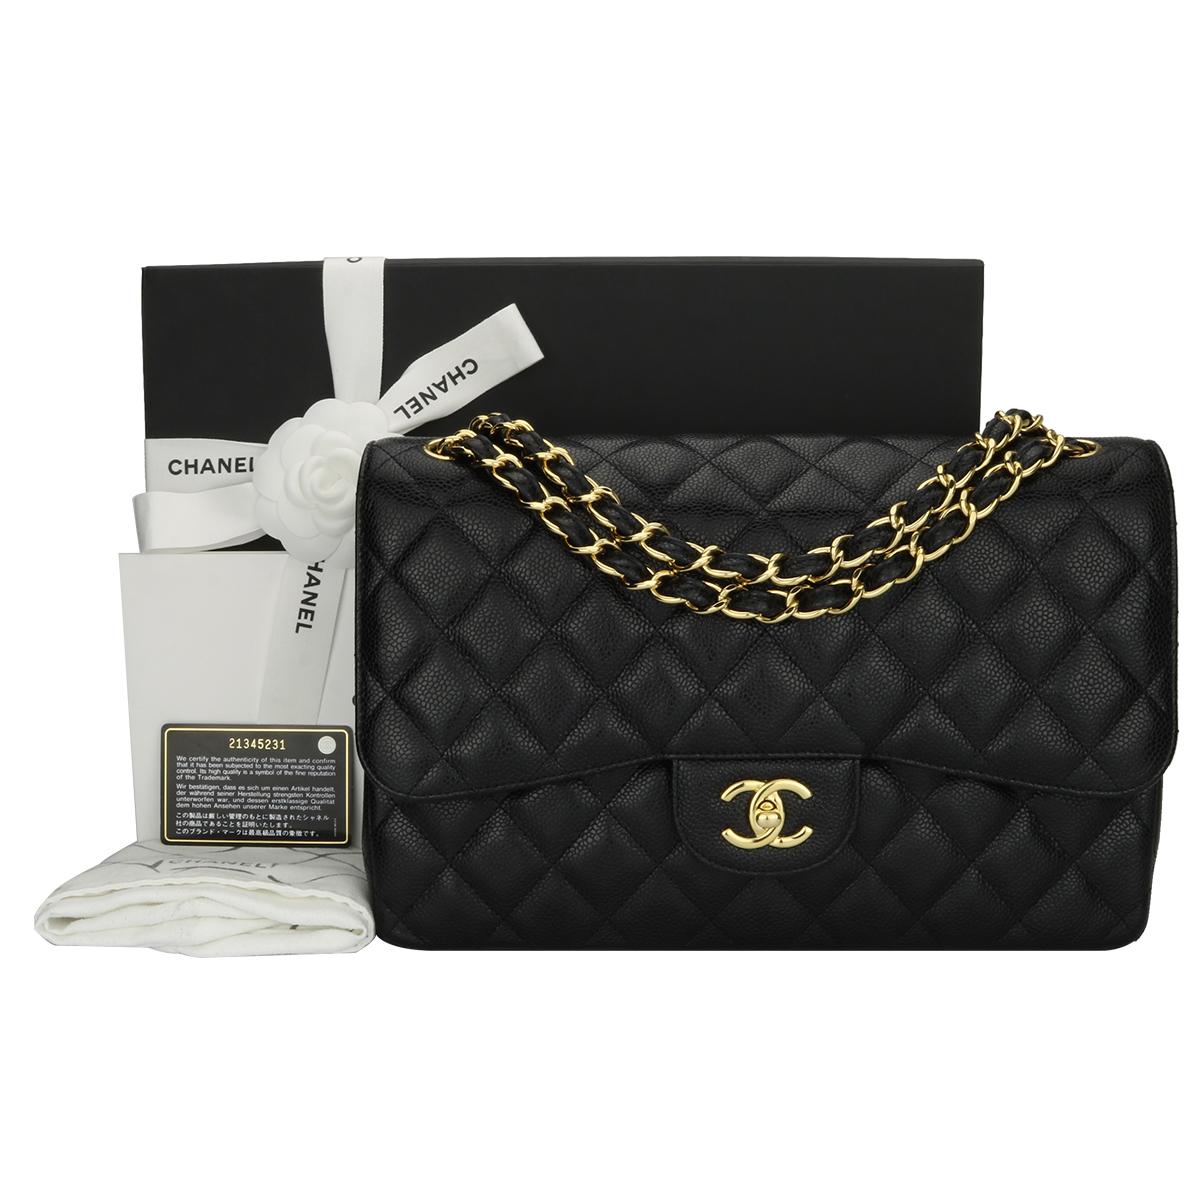 Authentic CHANEL Classic Jumbo Double Flap Black Caviar with Gold Hardware 2016.

This stunning bag is in a mint condition, the bag still holds its original shape, and the hardware is still very shiny. Leather smells fresh as if new.

Exterior